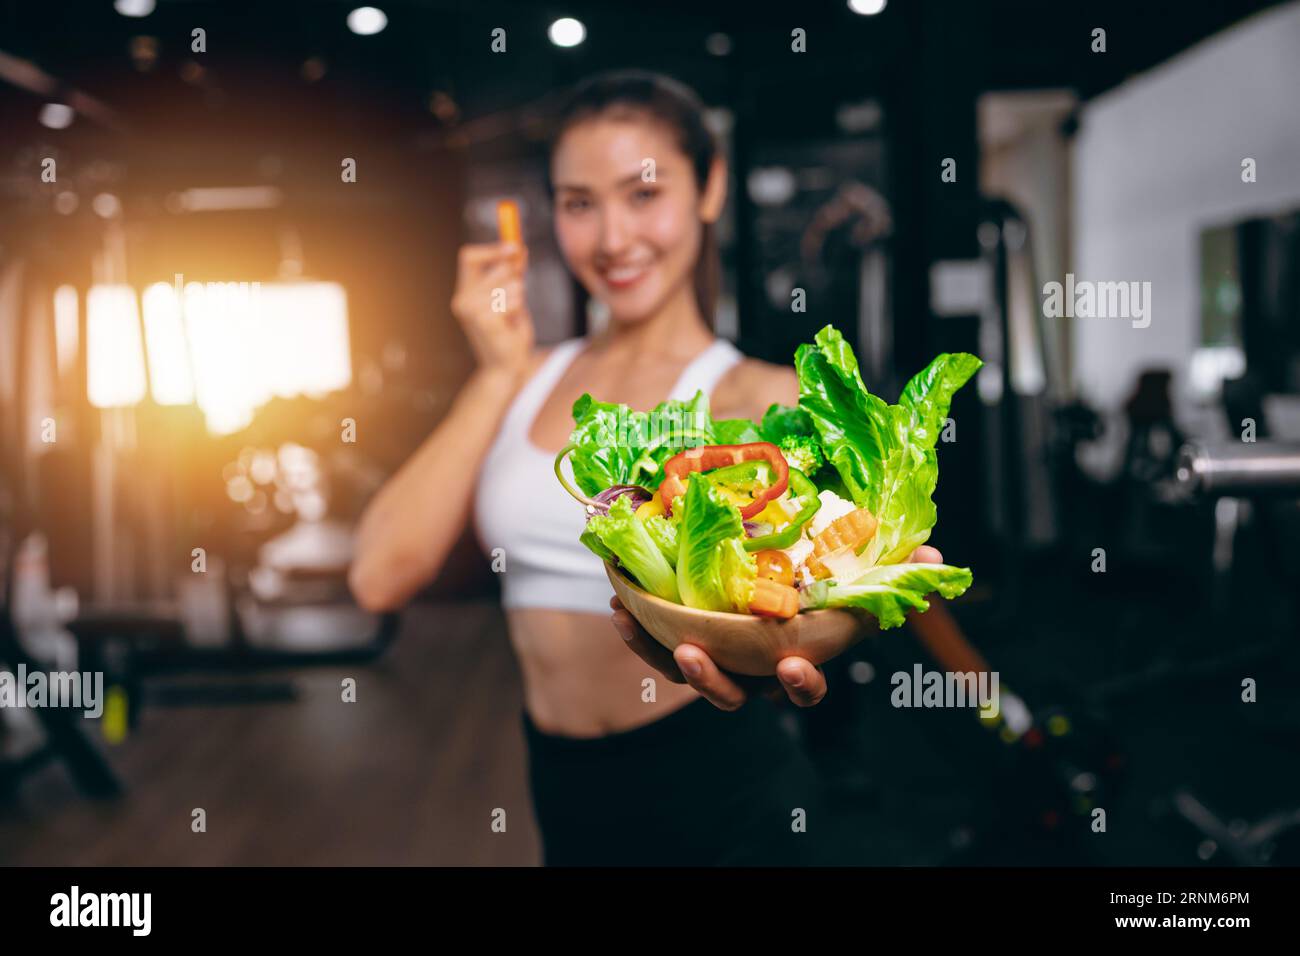 sport healthcare woman show mix vegetable bowl for healthy eating and dieting lifestyle concept Stock Photo